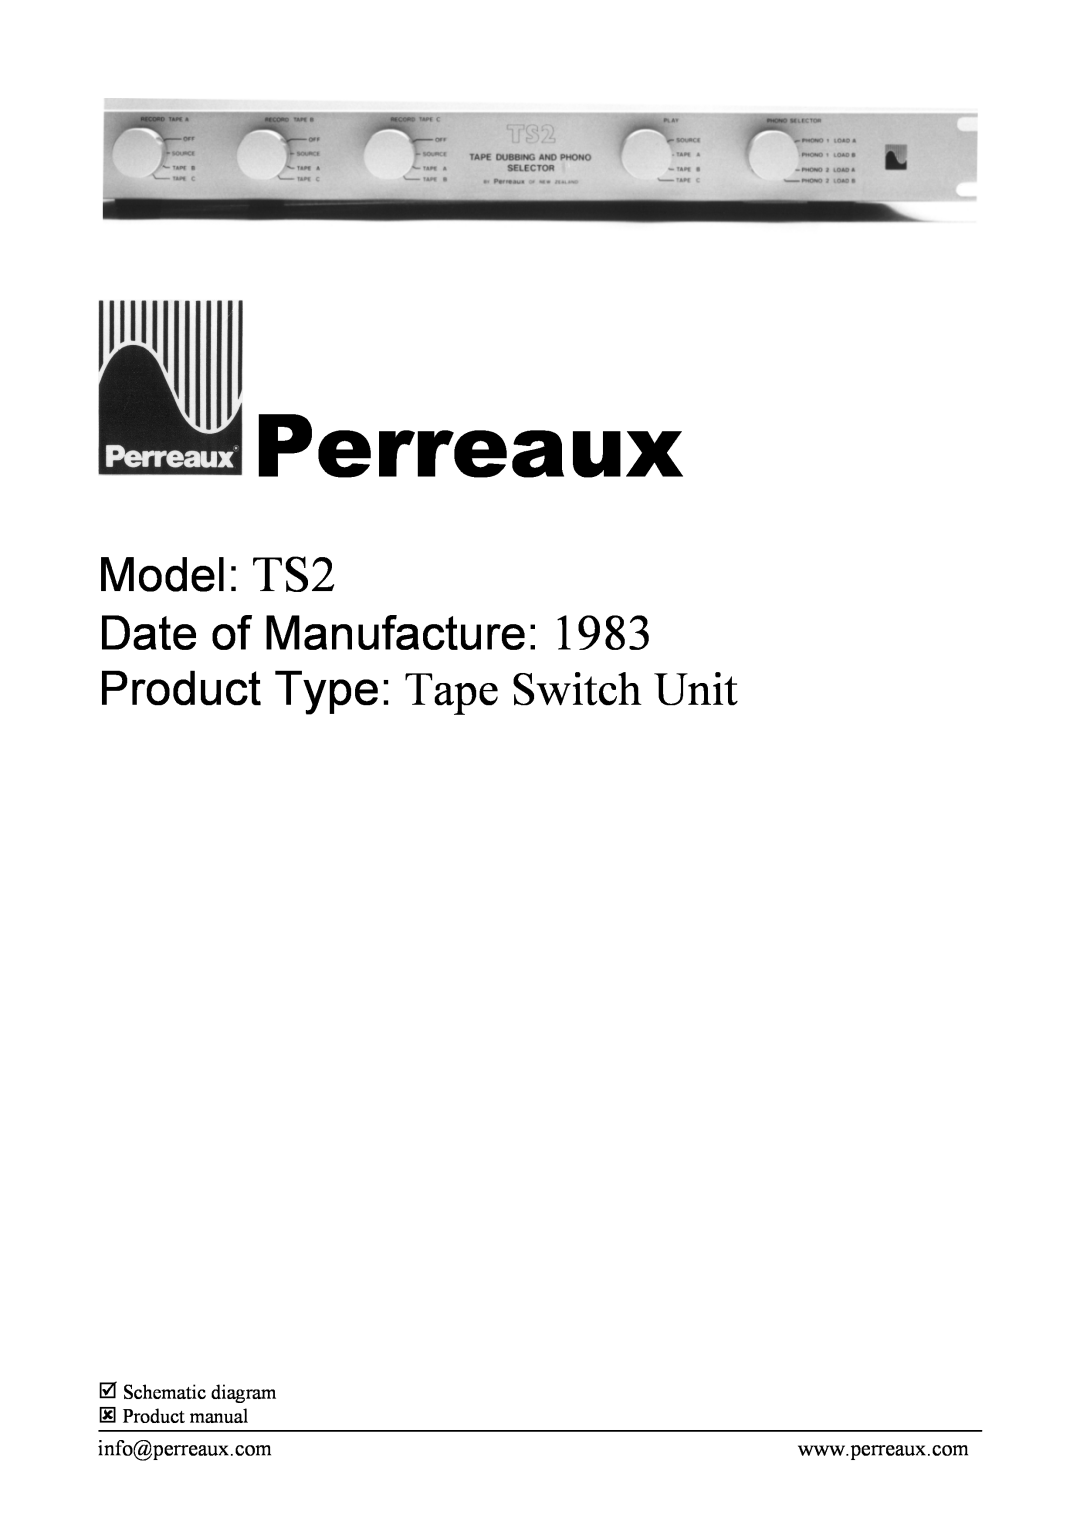 Perreaux manual Perreaux, Model TS2 Date of Manufacture, Product Type Tape Switch Unit, info@perreaux.com 